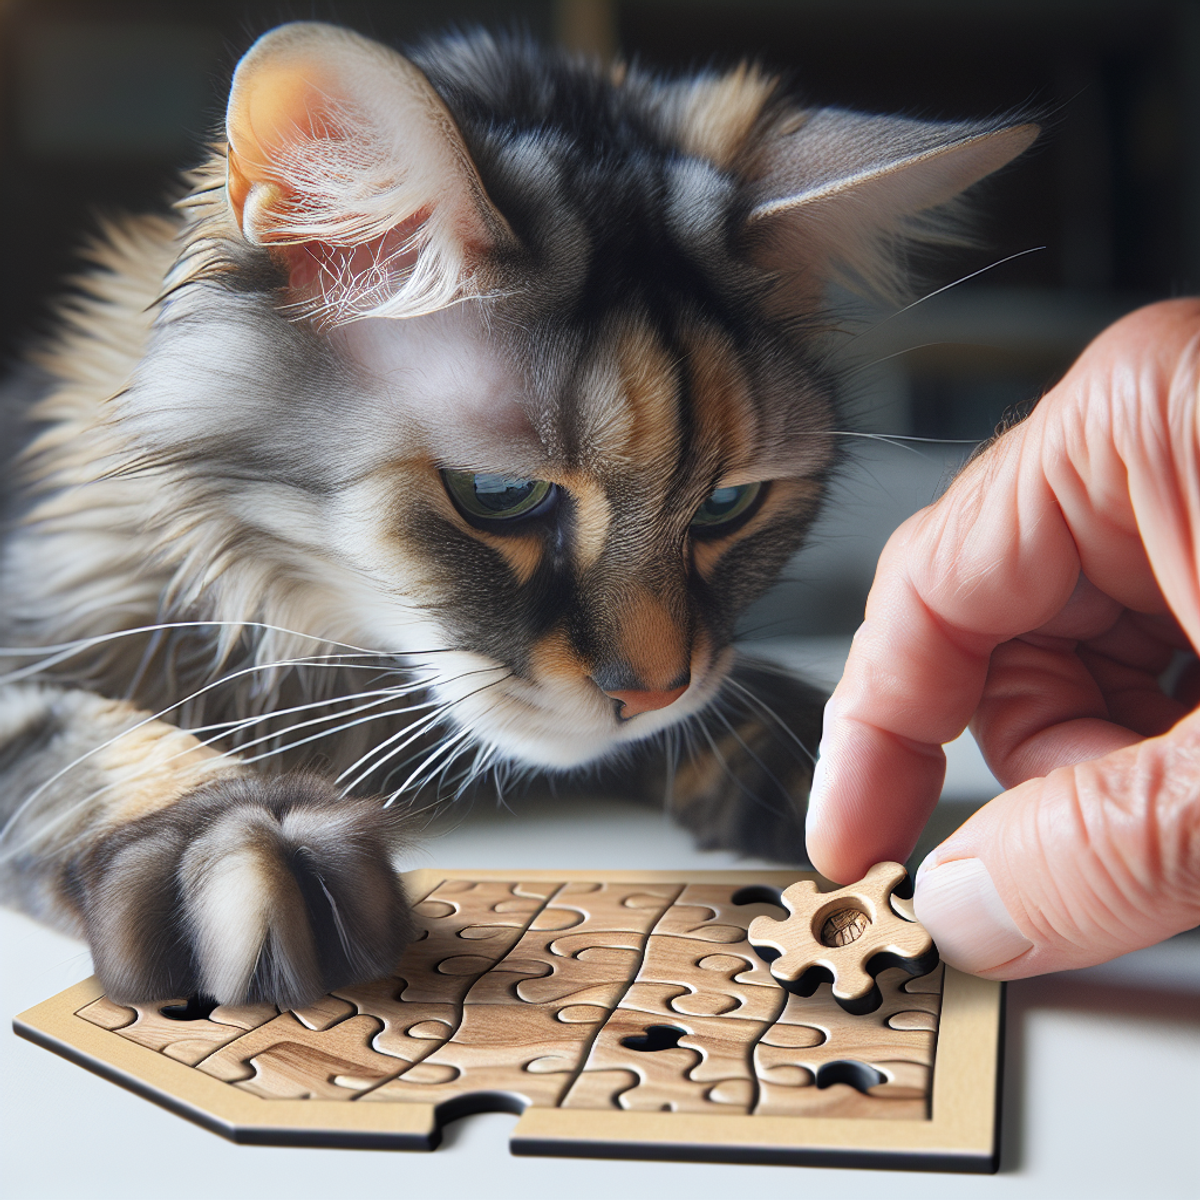 An old cat with gray fur intently playing with a puzzle toy, using its paws and claws to interact with the toy.